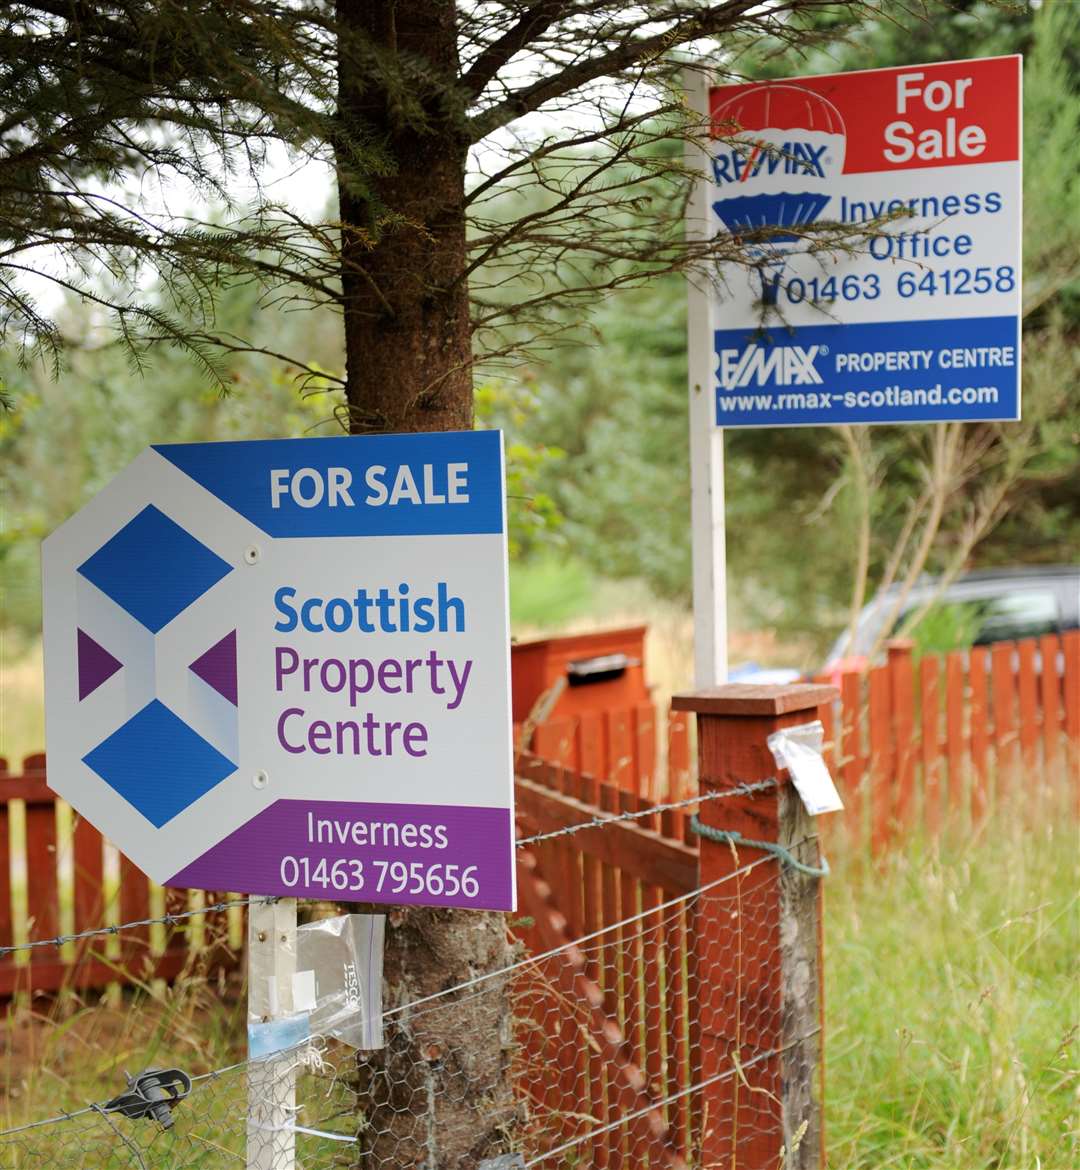 Highland house prices rose 6% year-on-year in July.